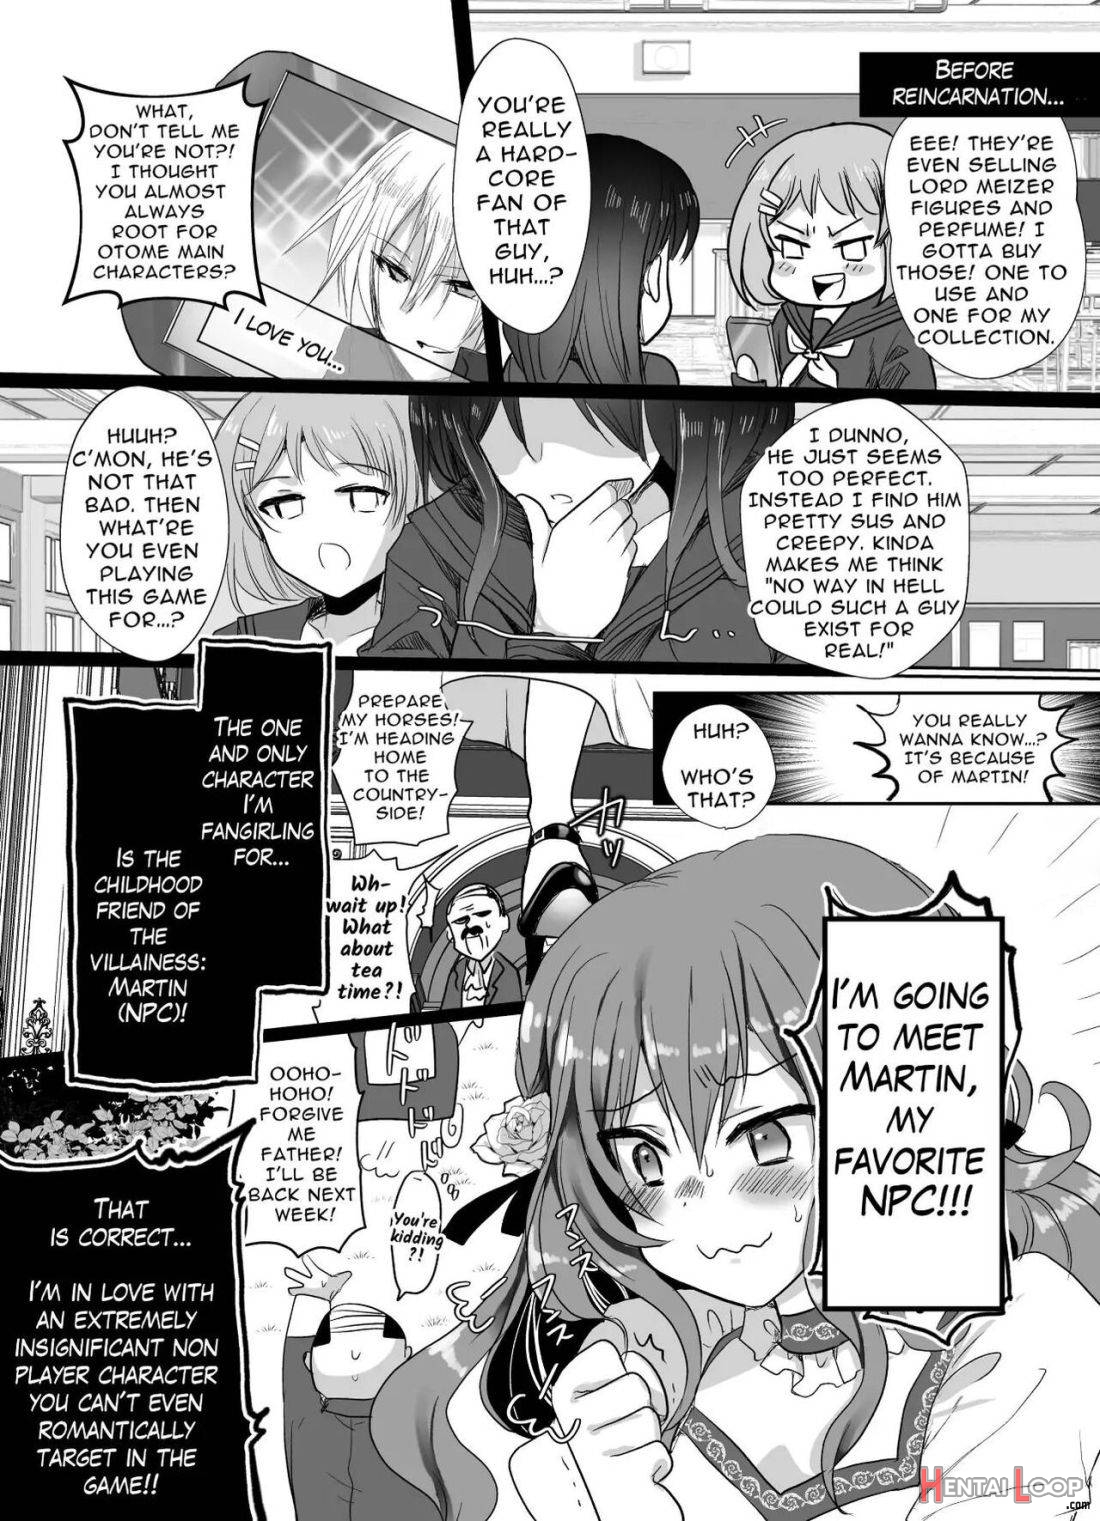  JK’s Tragic Isekai Reincarnation as the Villainess ~But My Precious Side Character!~ page 4